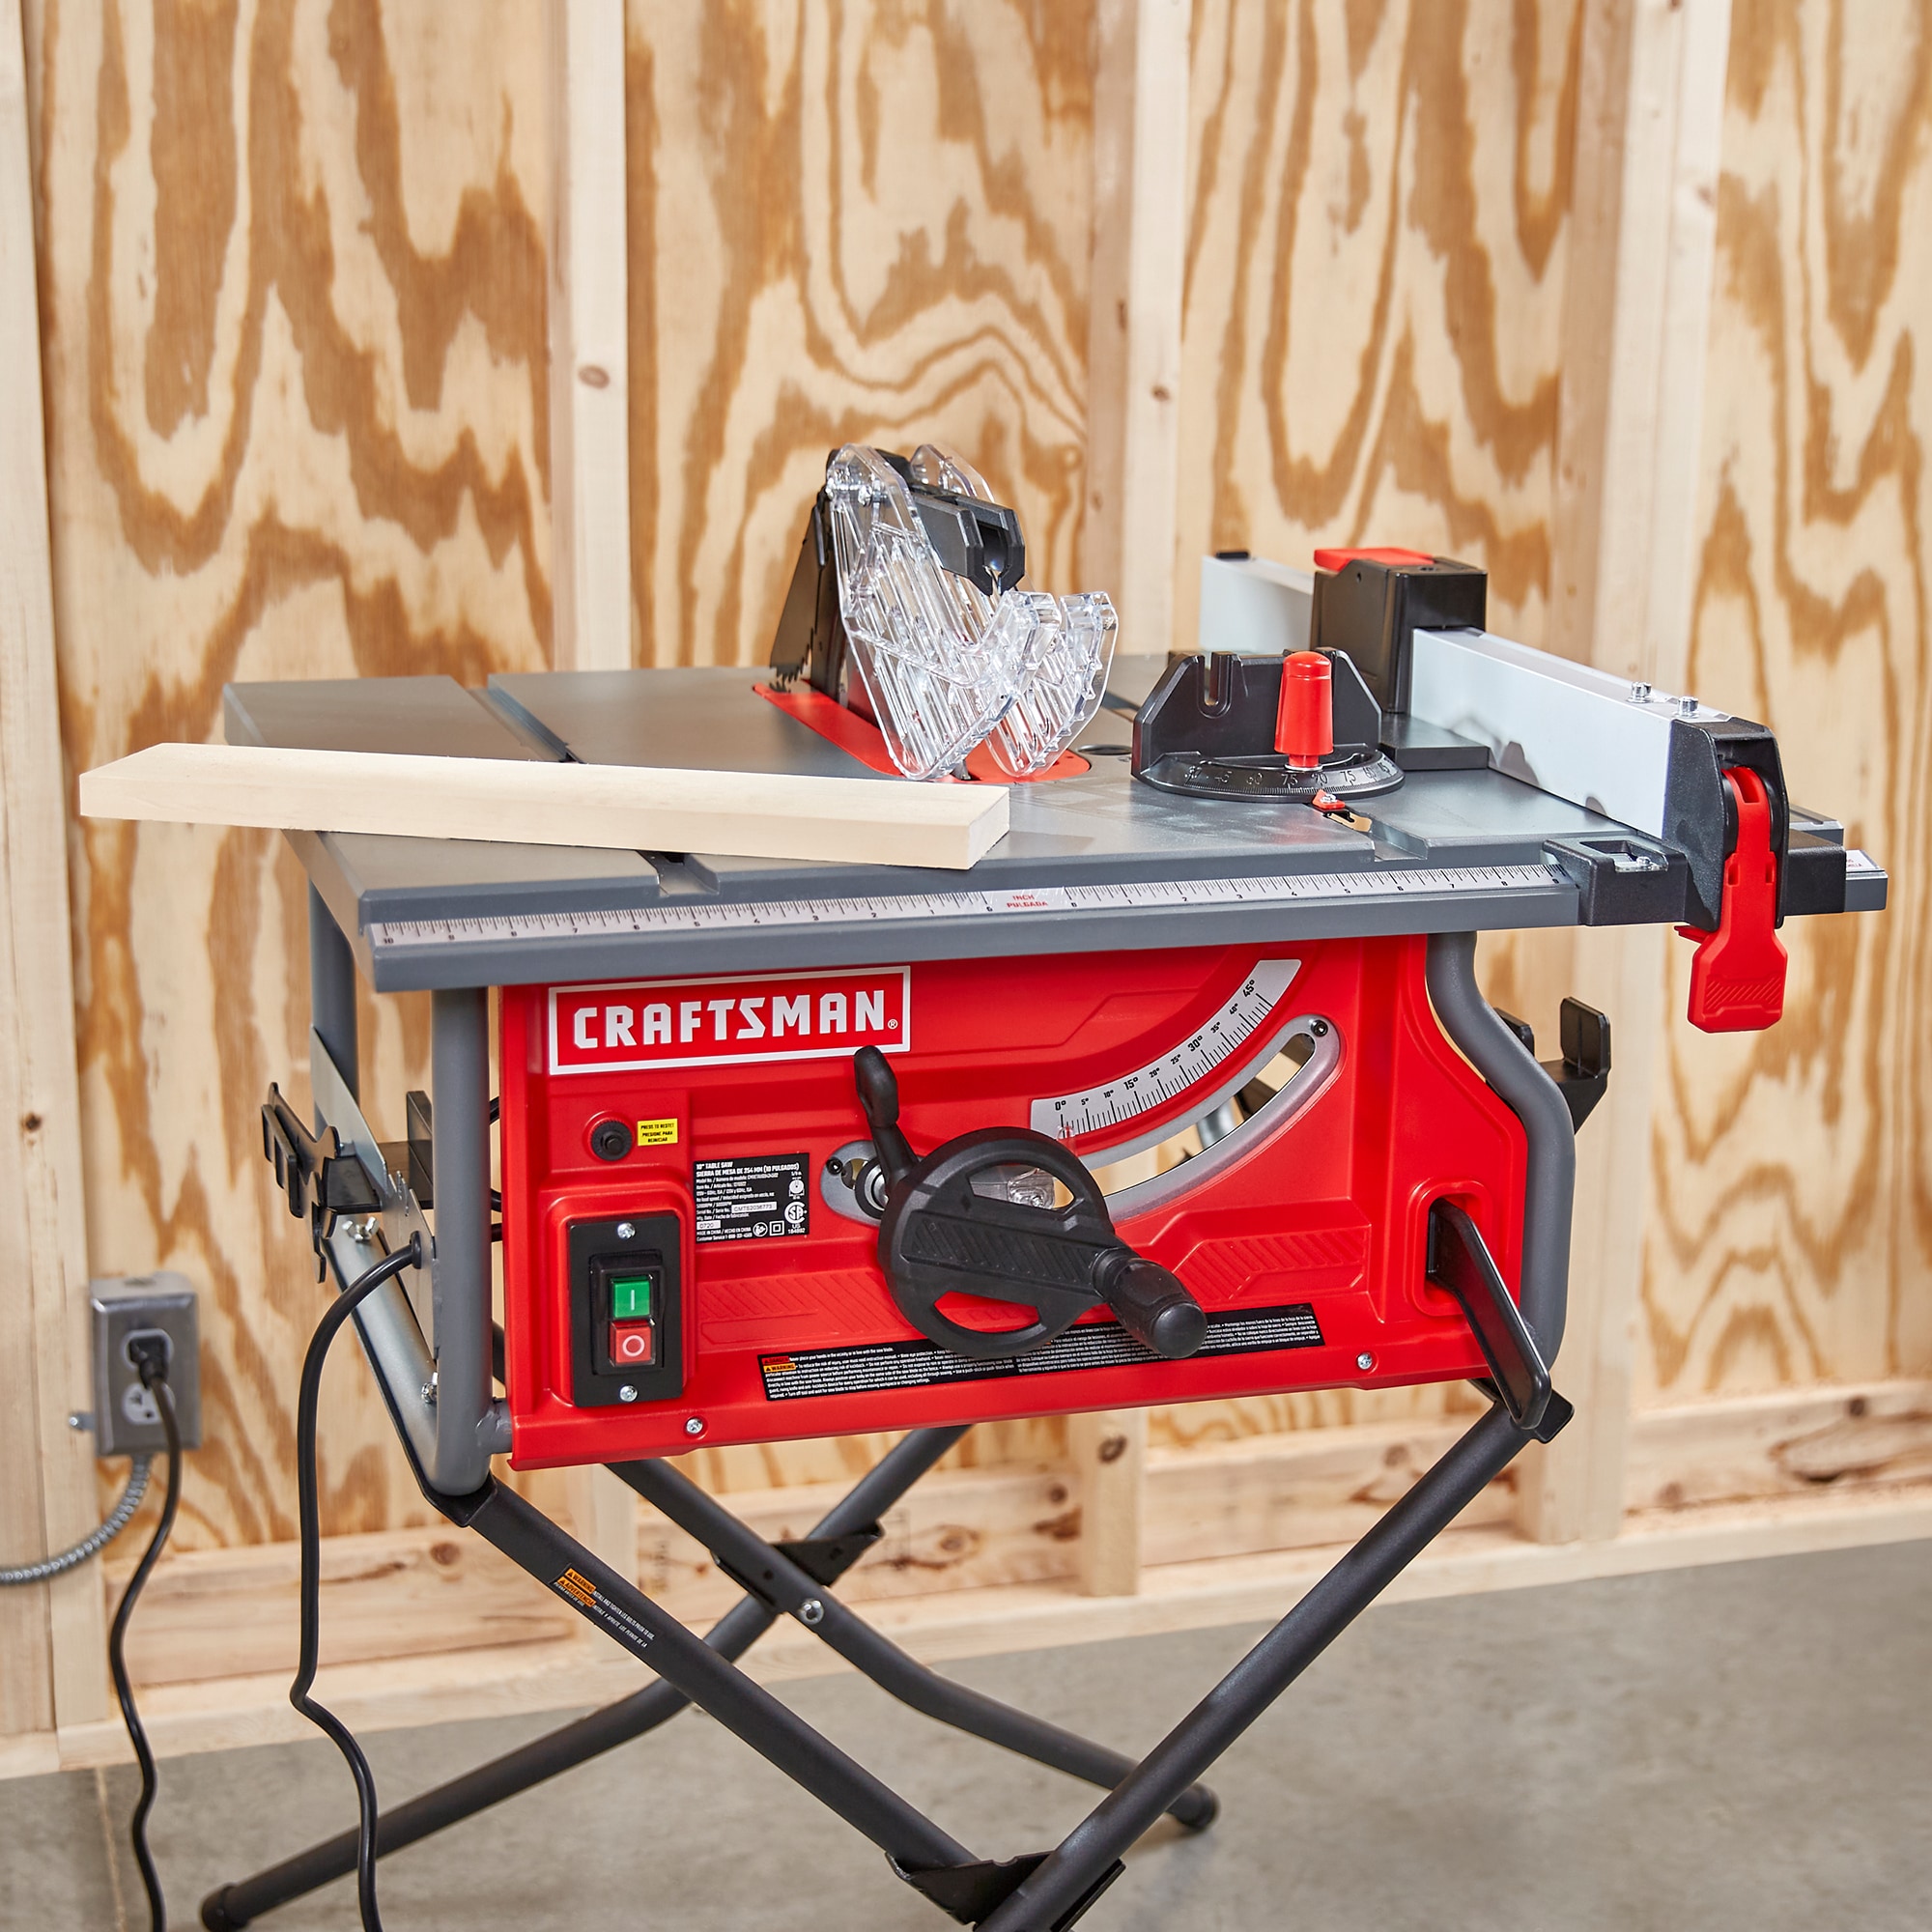 Build A Table Saw In 10 Minutes 